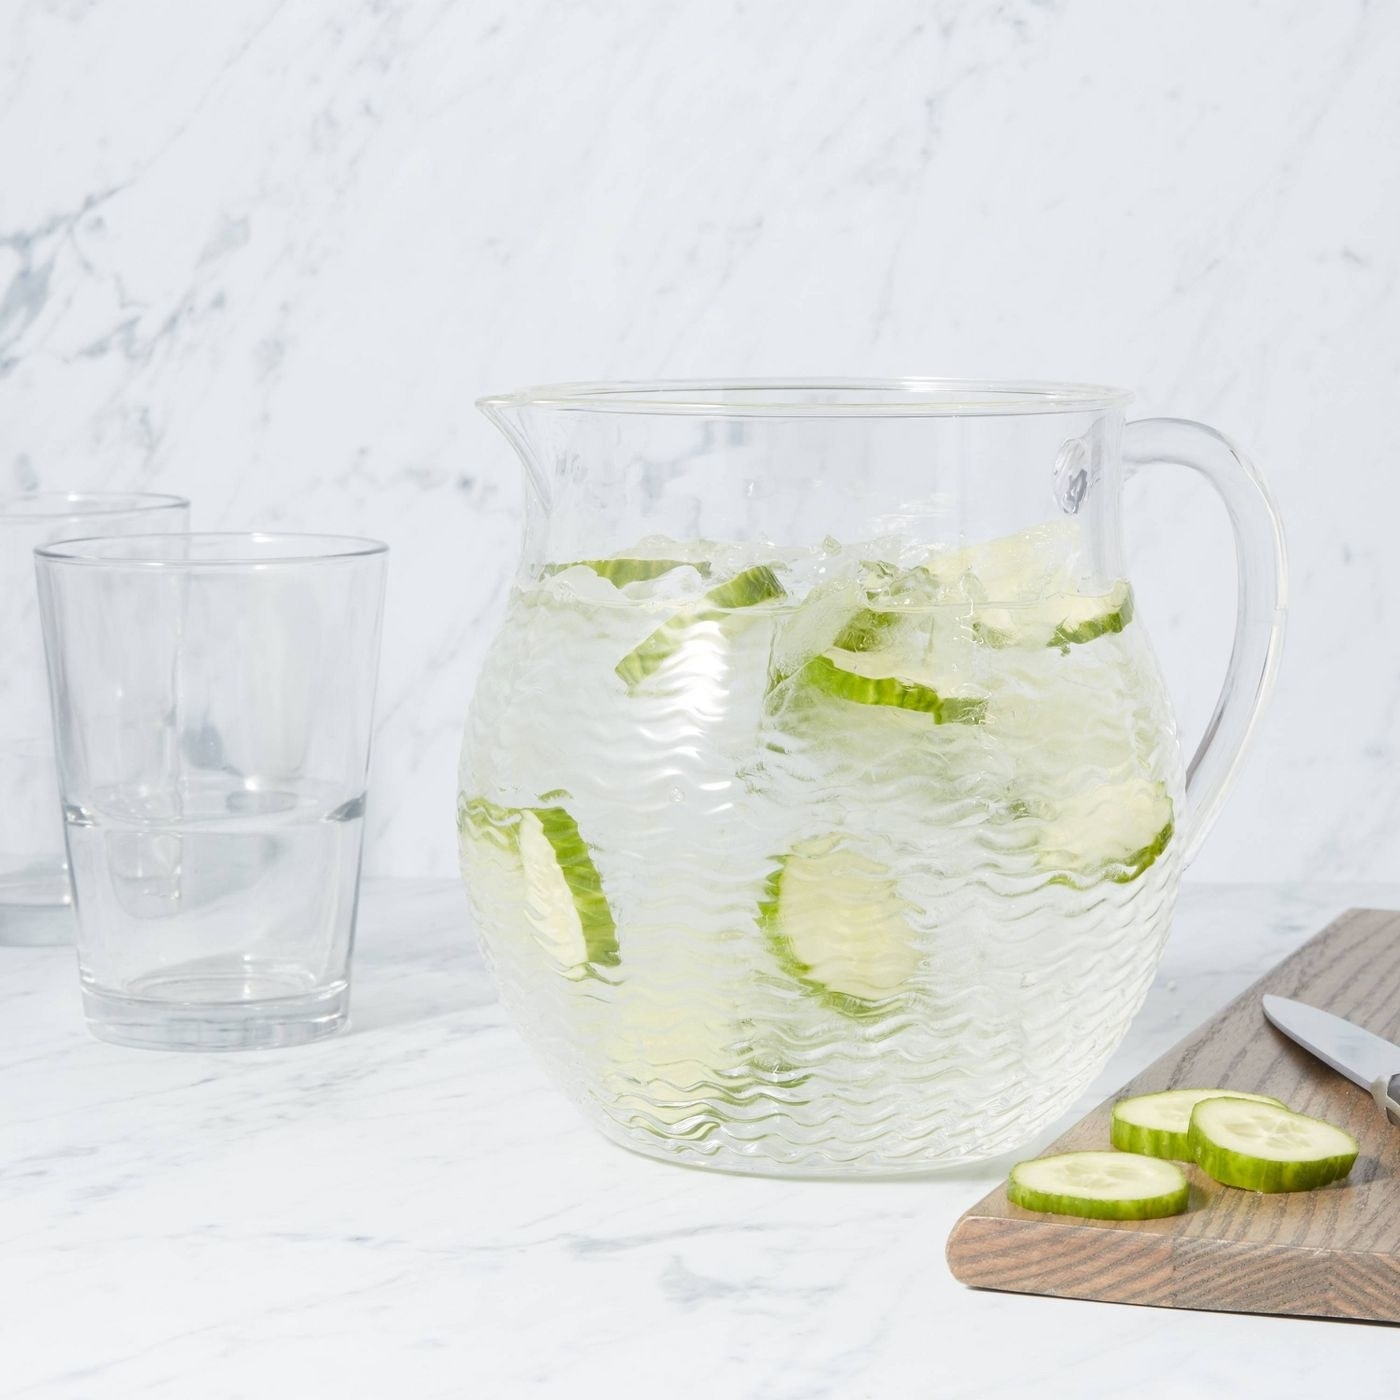 the clear textured pitcher with cucumber slices